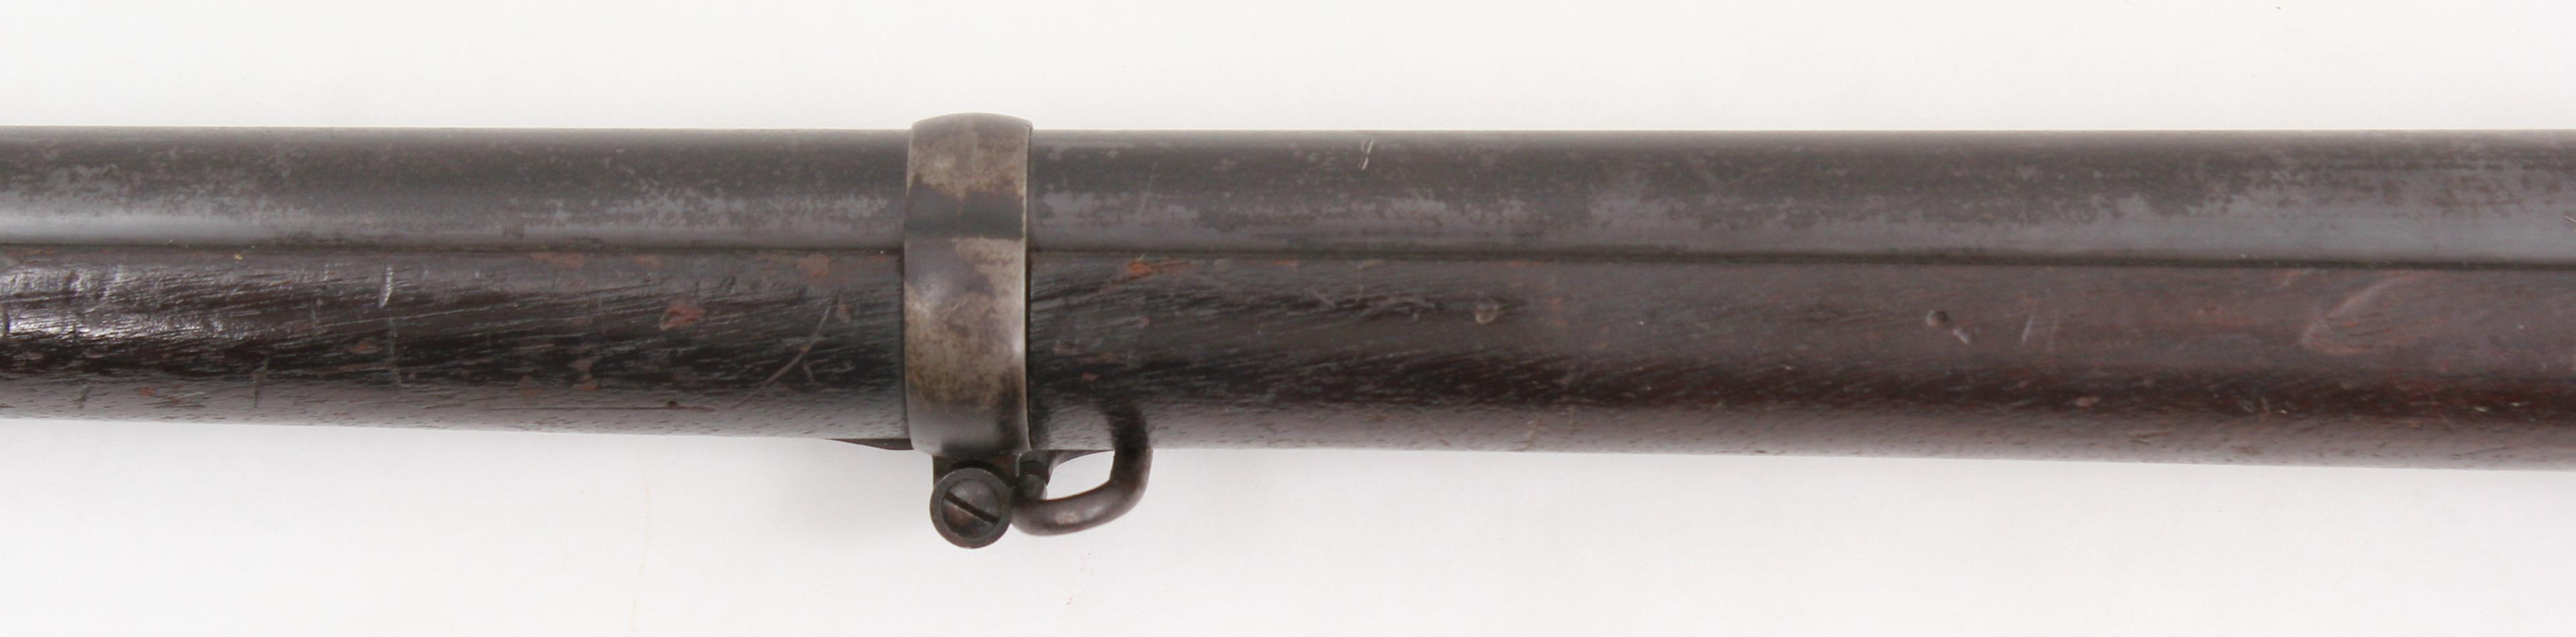 *Sharps Rifle Manufacturing Co., New Model 1859 Military Rifle, .52 cal